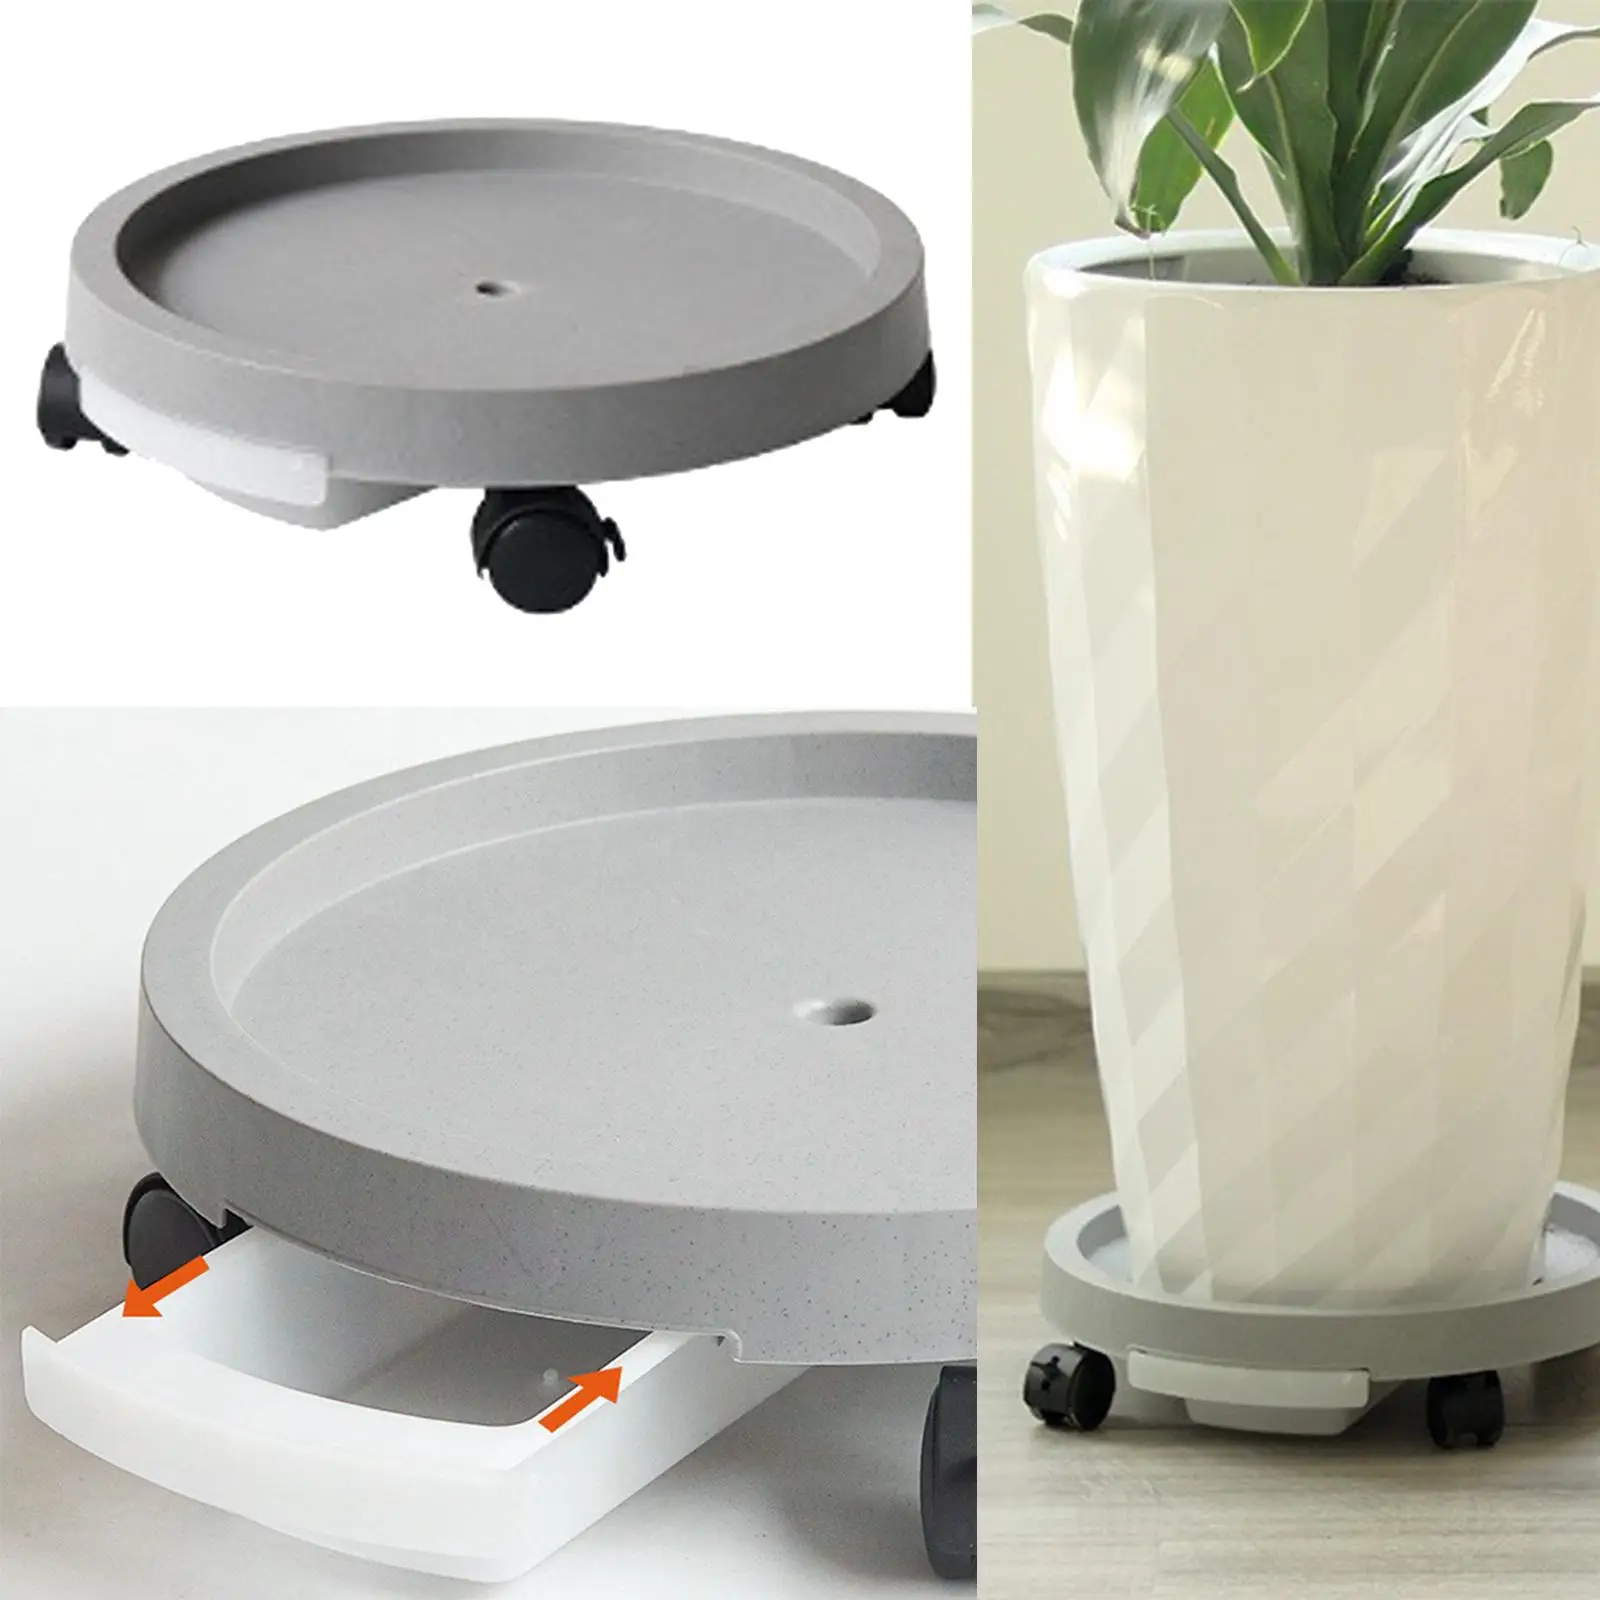 Heavy Flower Pots Tray with Wheels Caddy Mover Flower Container Stand Round for Garden Outdoor Shop Office Decoration